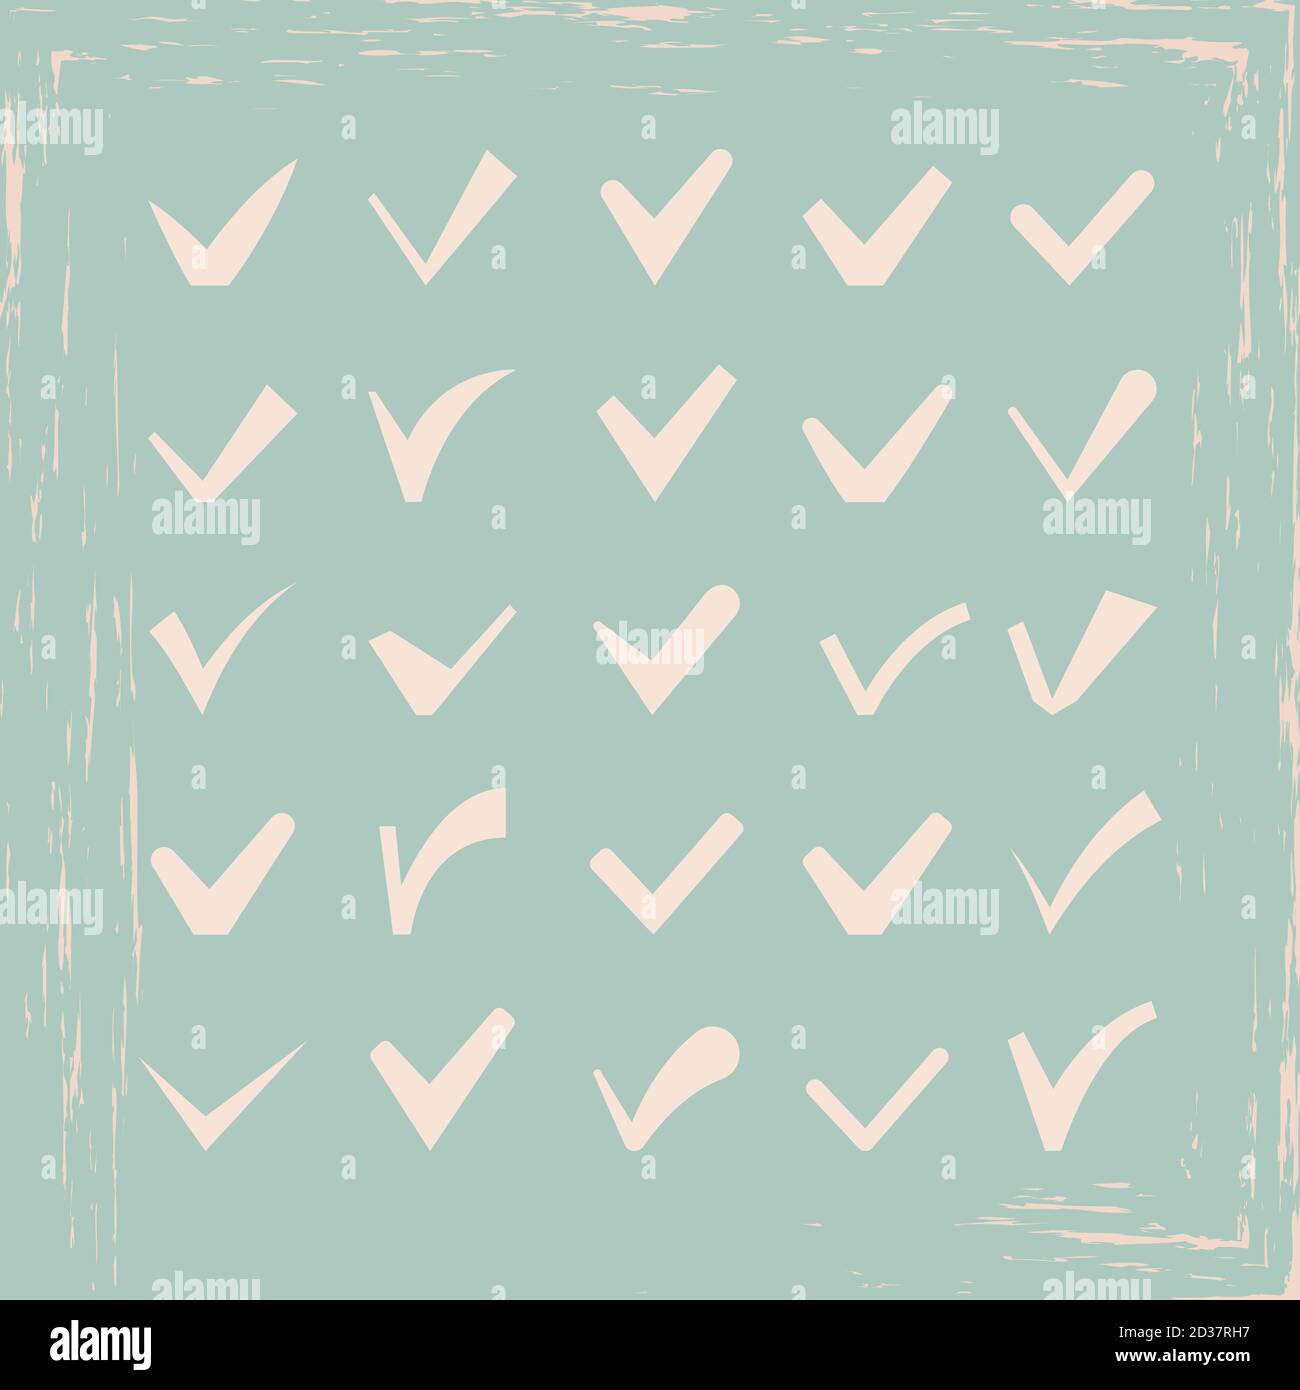 Vector confirm icons vintage style collection on blue background Stock Vector